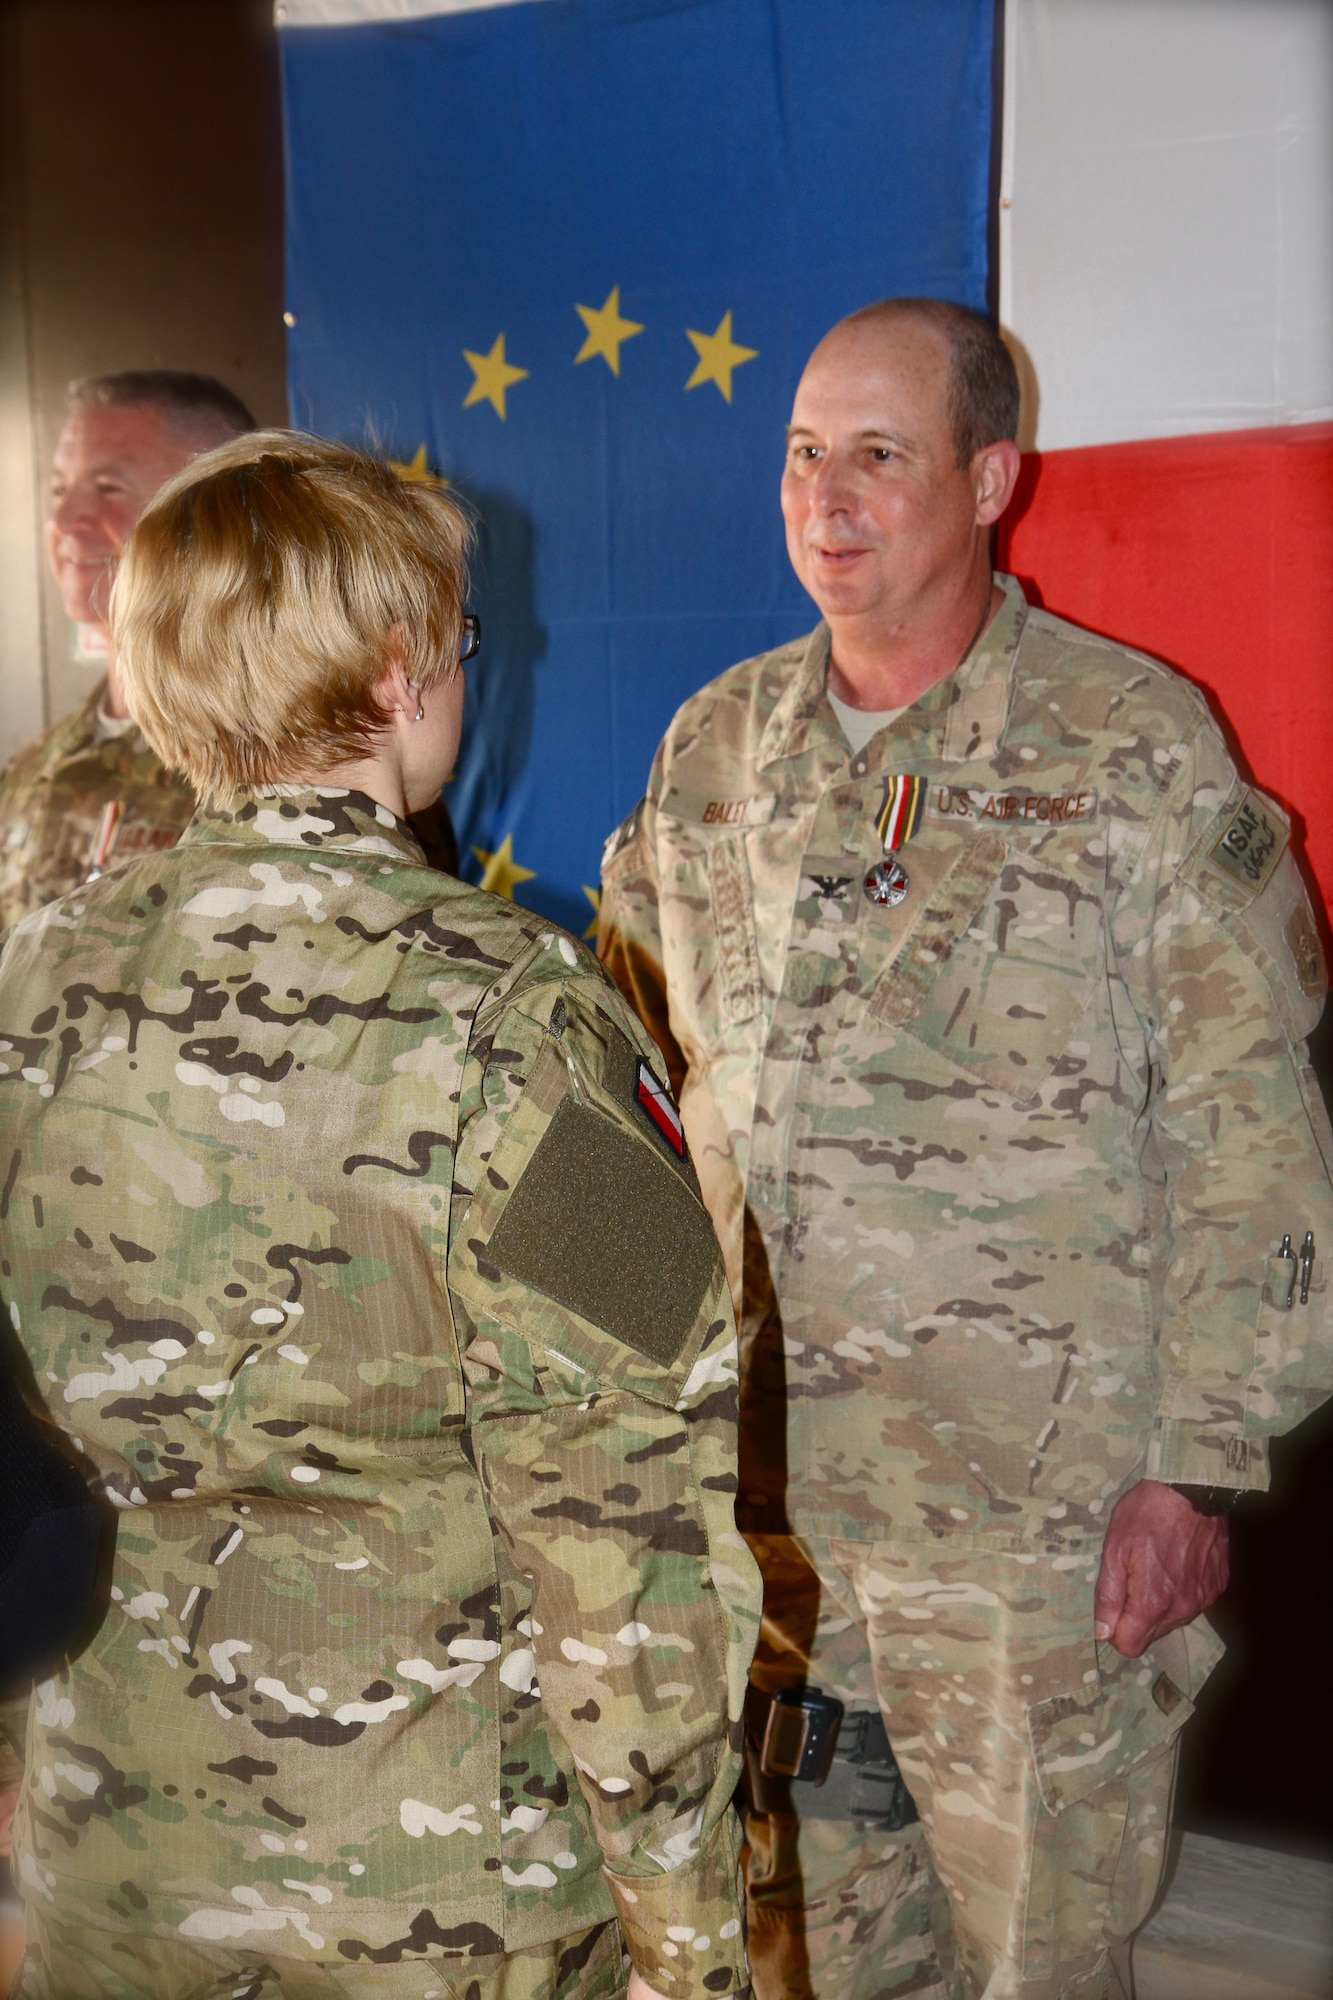 Beata Oczkowicz, the Polish Deputy Minister of National Defense, presents the Polish Army Medal (Silver) to U.S. Air Force Col. Jimmie D. Bailey II, 455th Expeditionary Medical Group commander, at the Craig Joint Theater Hospital on Bagram Airfield, Afghanistan, March 27, 2013. Bailey accepted the medal on behalf of all of the men and women of Craig Joint Theater Hospital for their support to wounded Polish servicemembers. The Polish Army Medal was established in 1999 to recognize foreign nationals, military or civilian, for their service to the Polish Armed Forces. Bailey said "this has been one of the most memorable events of my year here.  It has been an honor to serve with our Coalition partners." (U.S. Air Force photo courtesy of Maj. Tara Pierce)